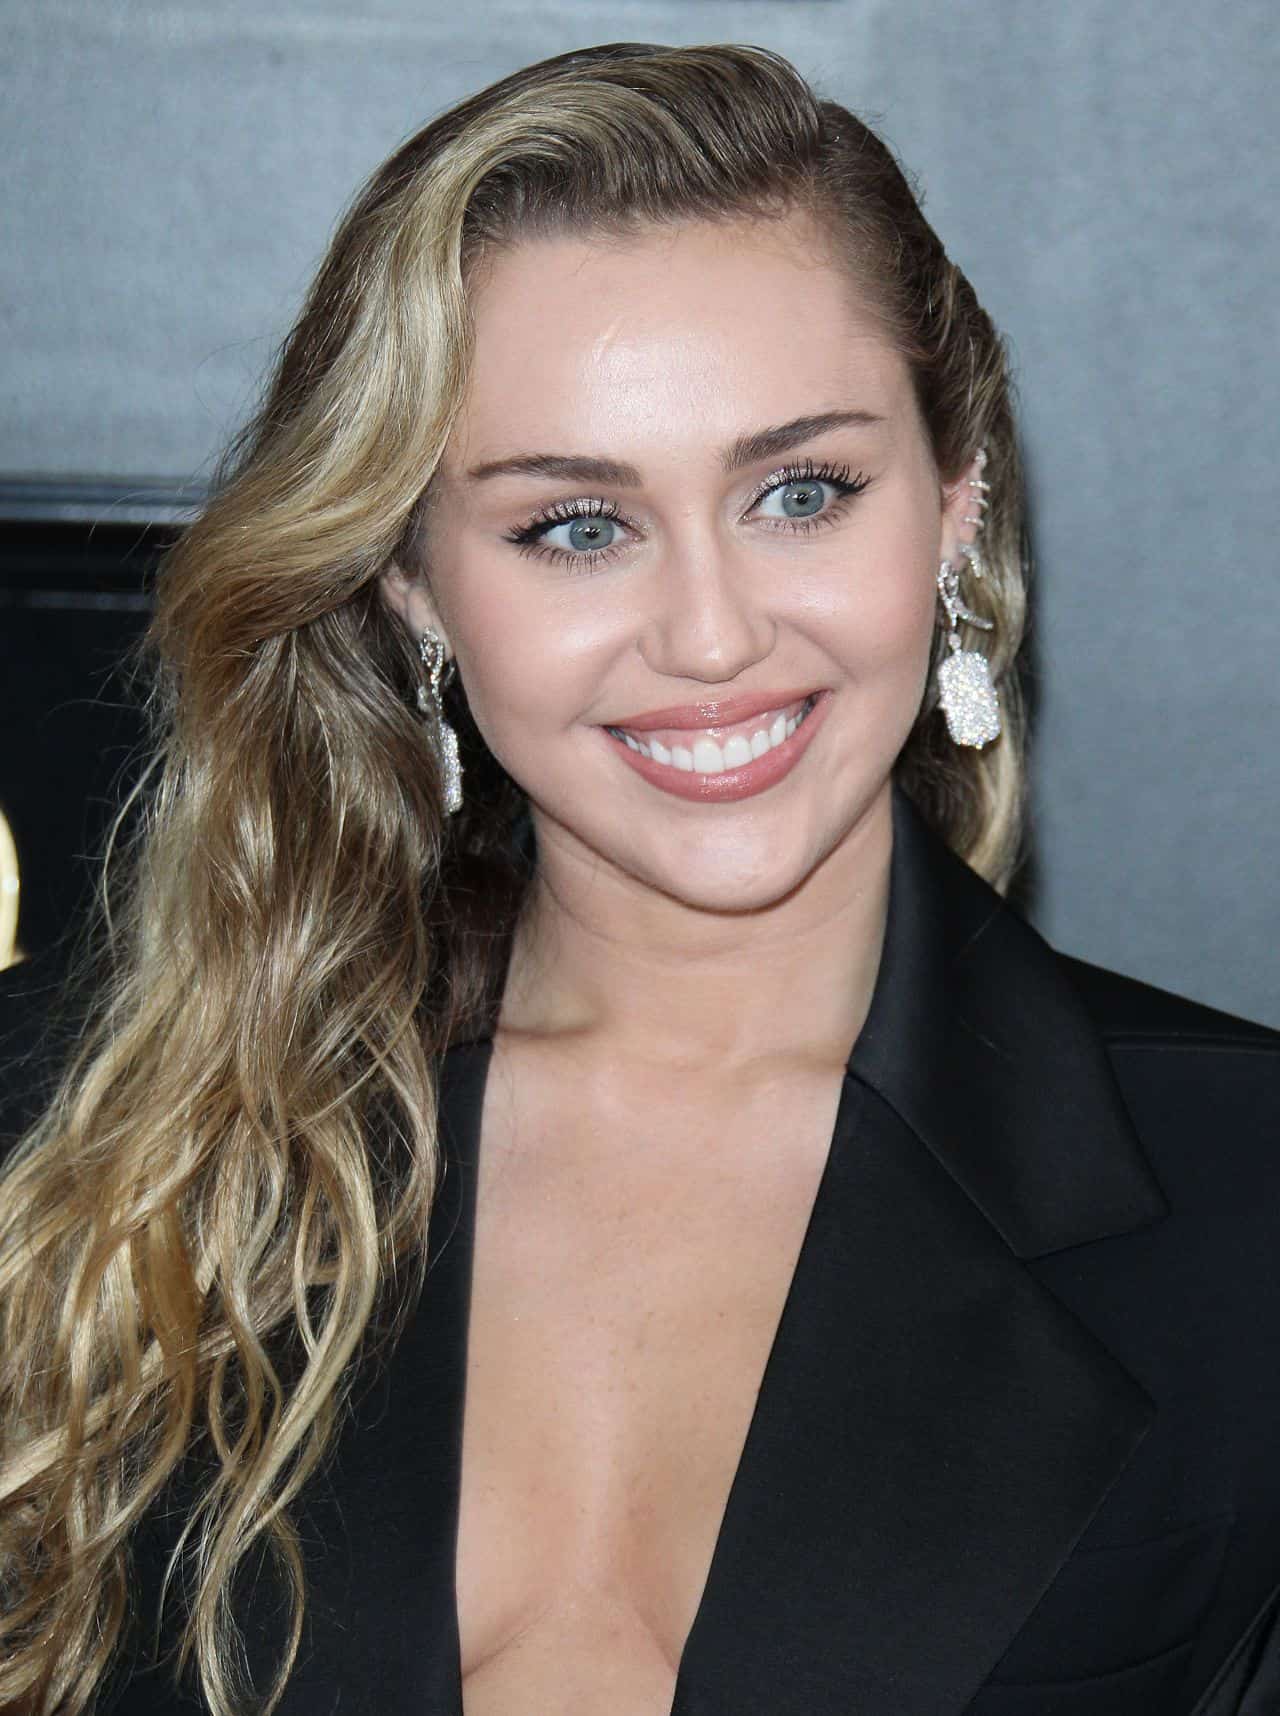 Miley Cyrus Turns Heads at the Grammy Awards with Her Chic Low-Cut Blazer